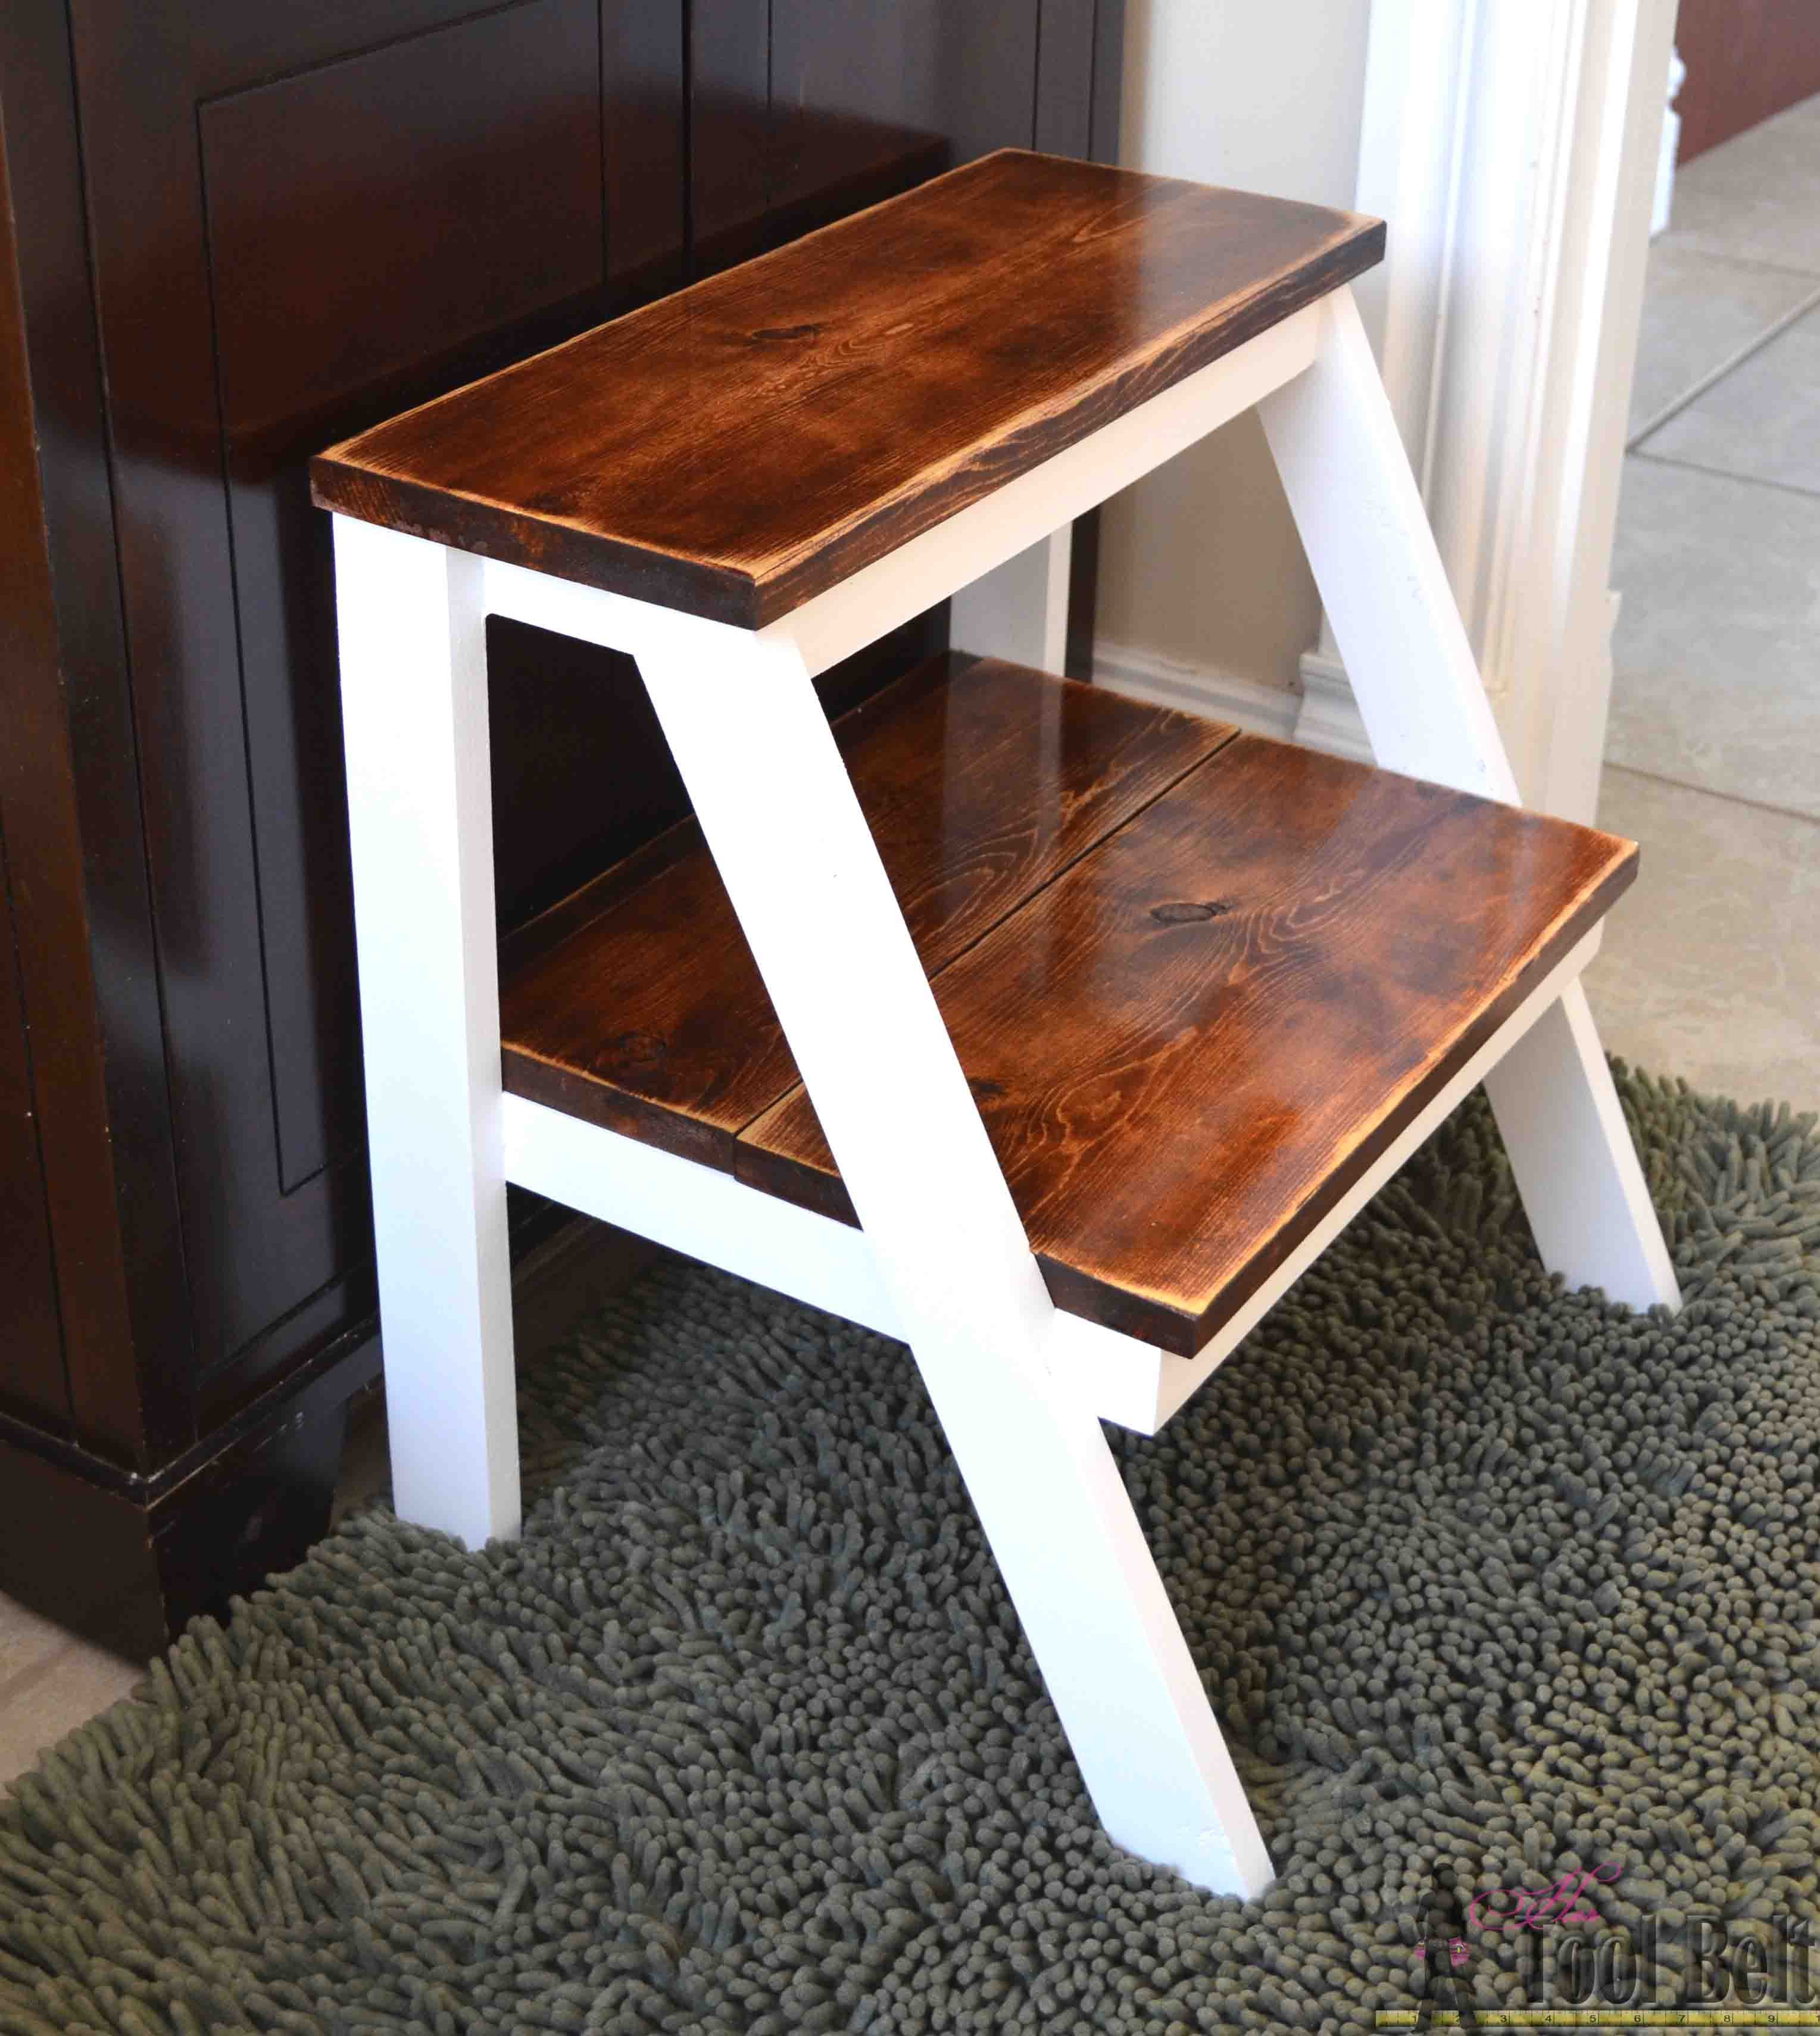 Best ideas about DIY Step Stools
. Save or Pin Kid s Step Stool Her Tool Belt Now.